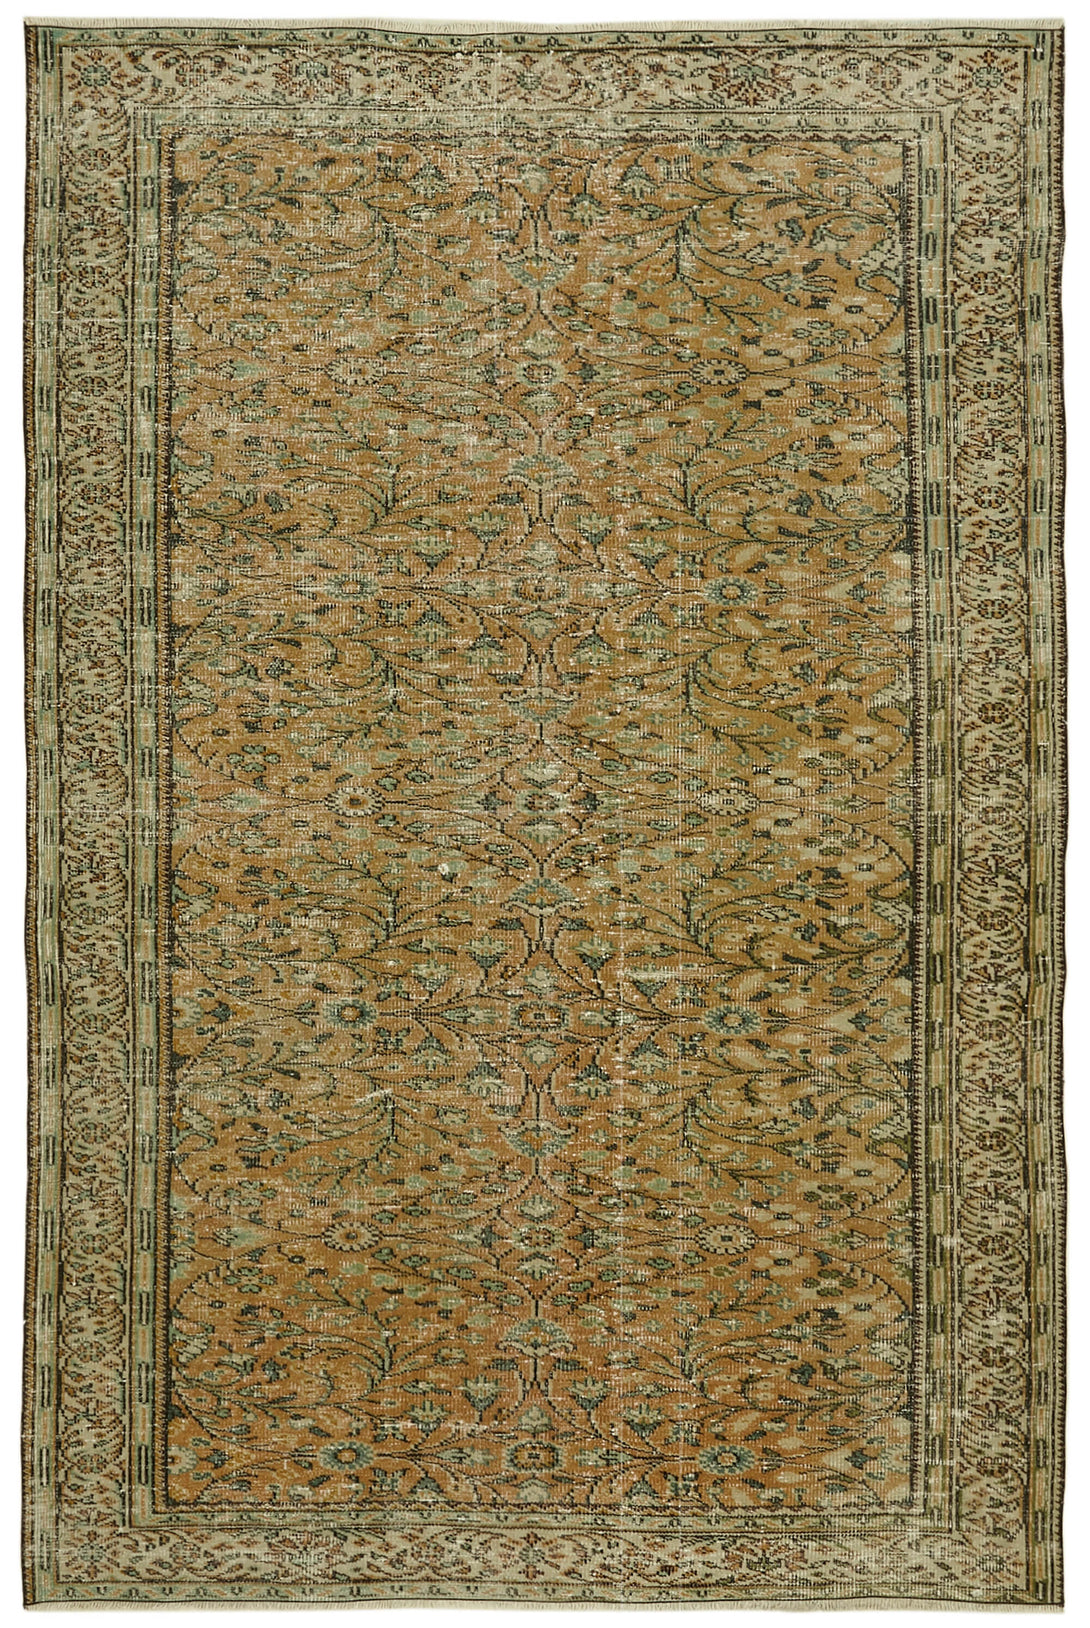 Handmade White Wash Area Rug > Design# OL-AC-41755 > Size: 6'-3" x 9'-5", Carpet Culture Rugs, Handmade Rugs, NYC Rugs, New Rugs, Shop Rugs, Rug Store, Outlet Rugs, SoHo Rugs, Rugs in USA